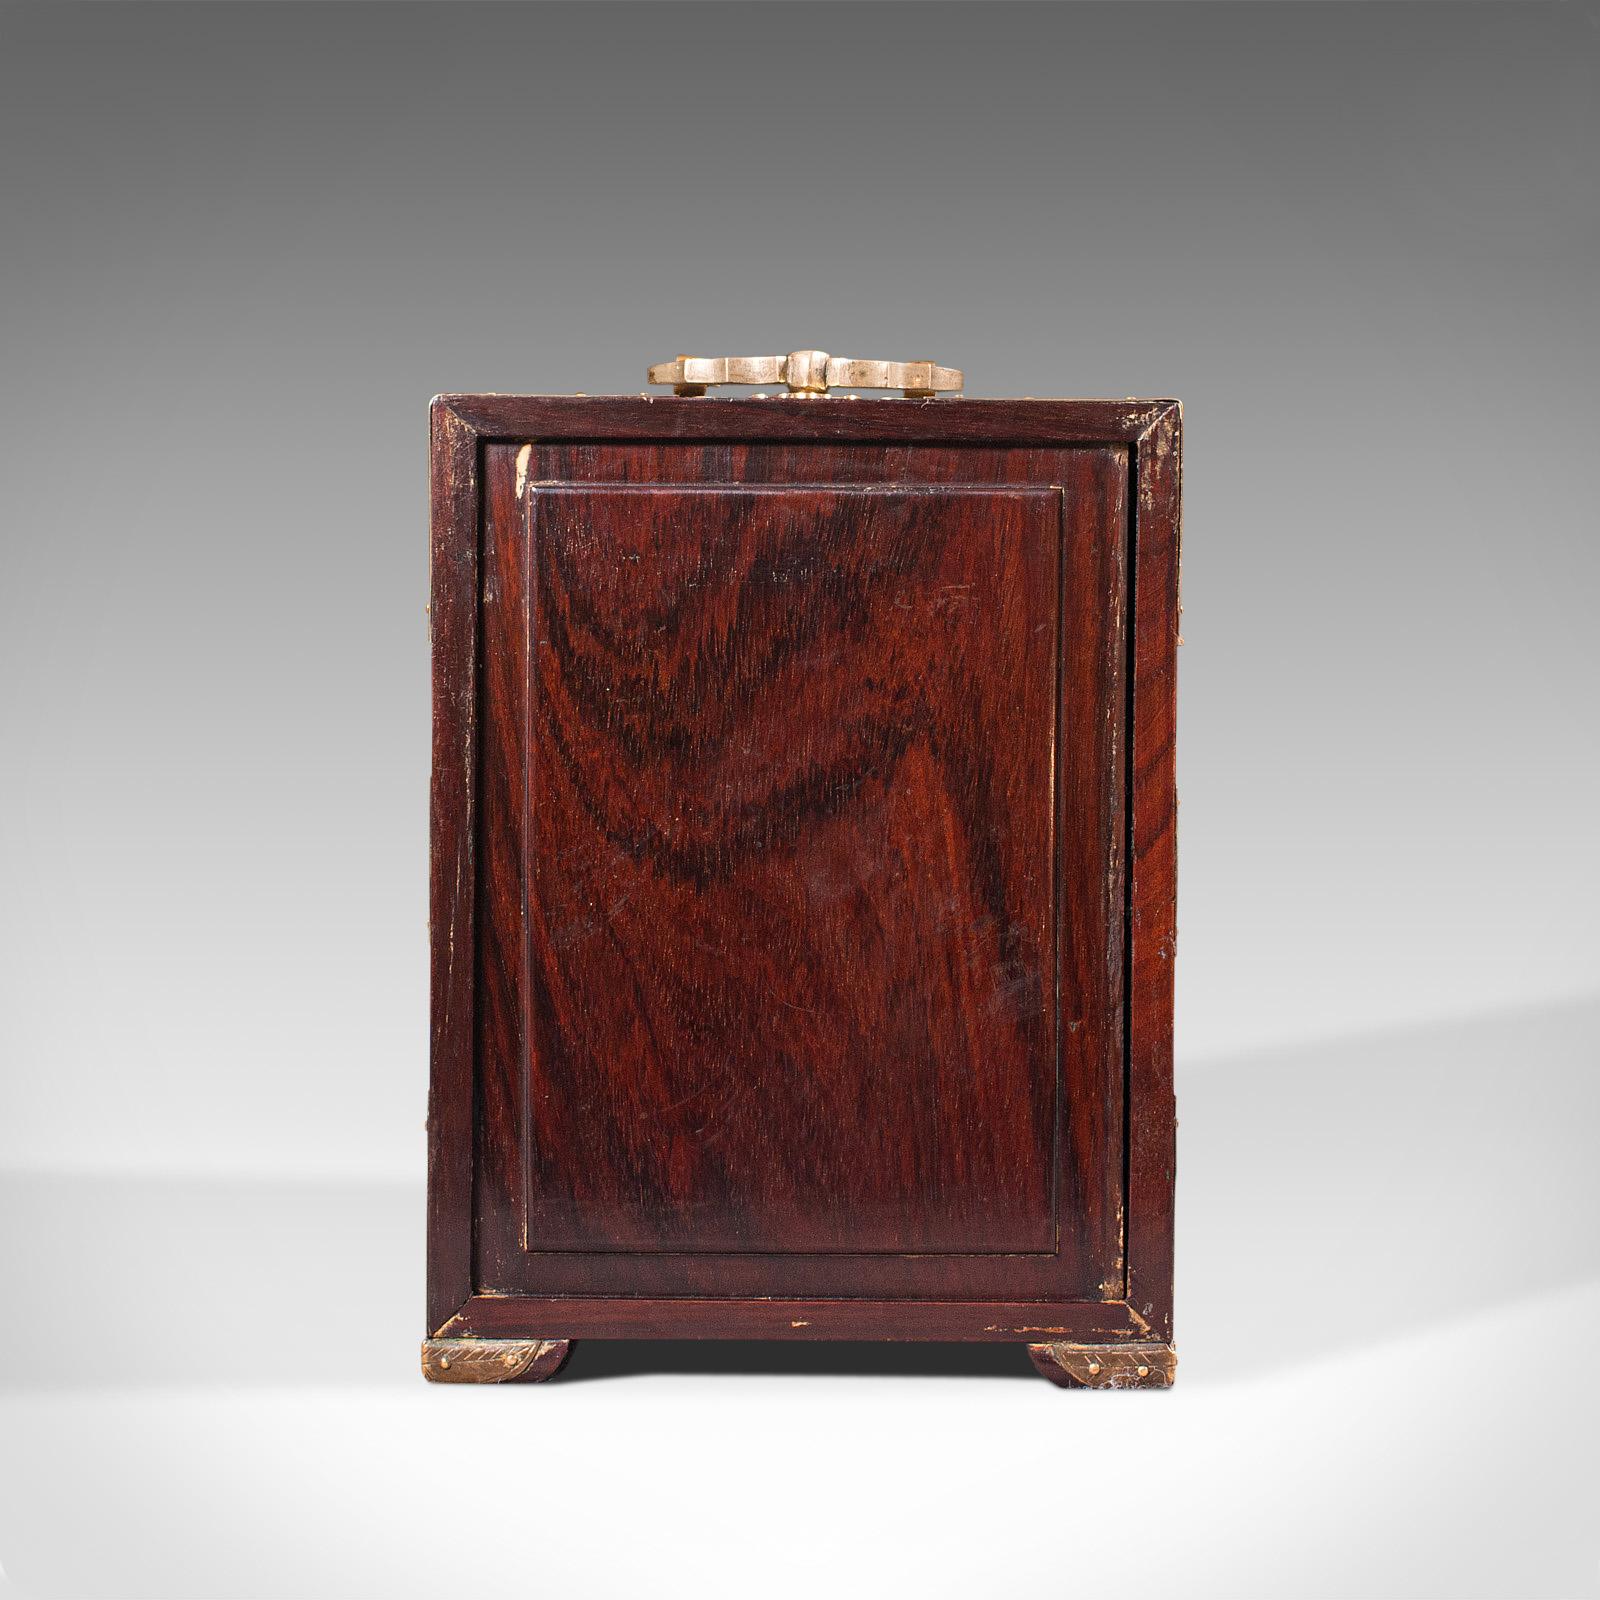 Antique Collector's Box, Chinese, Rosewood, Decorative Specimen Case, Circa 1920 For Sale 2